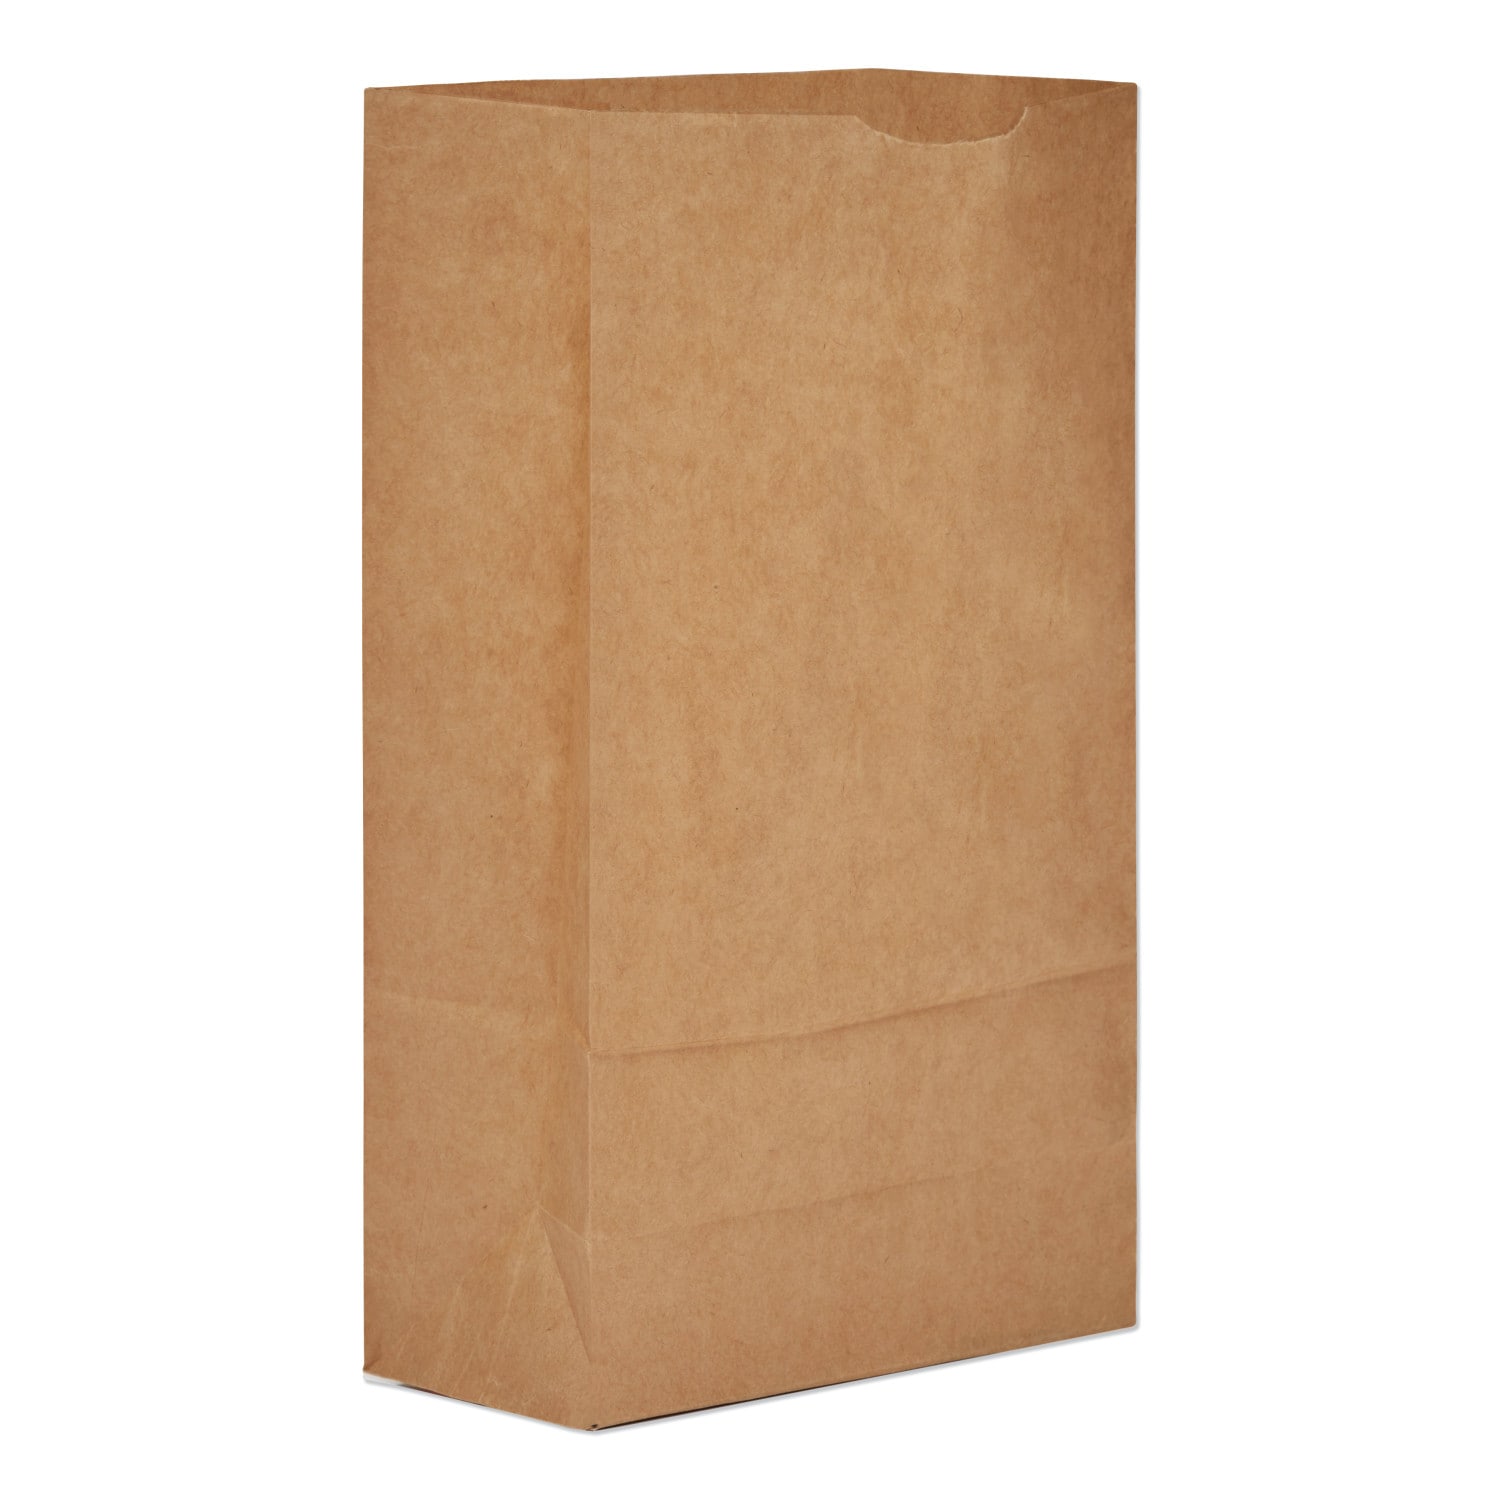 Rubbermaid Wax Lined Paper Bags (Rubbermaid 6141) | HomElectrical.com